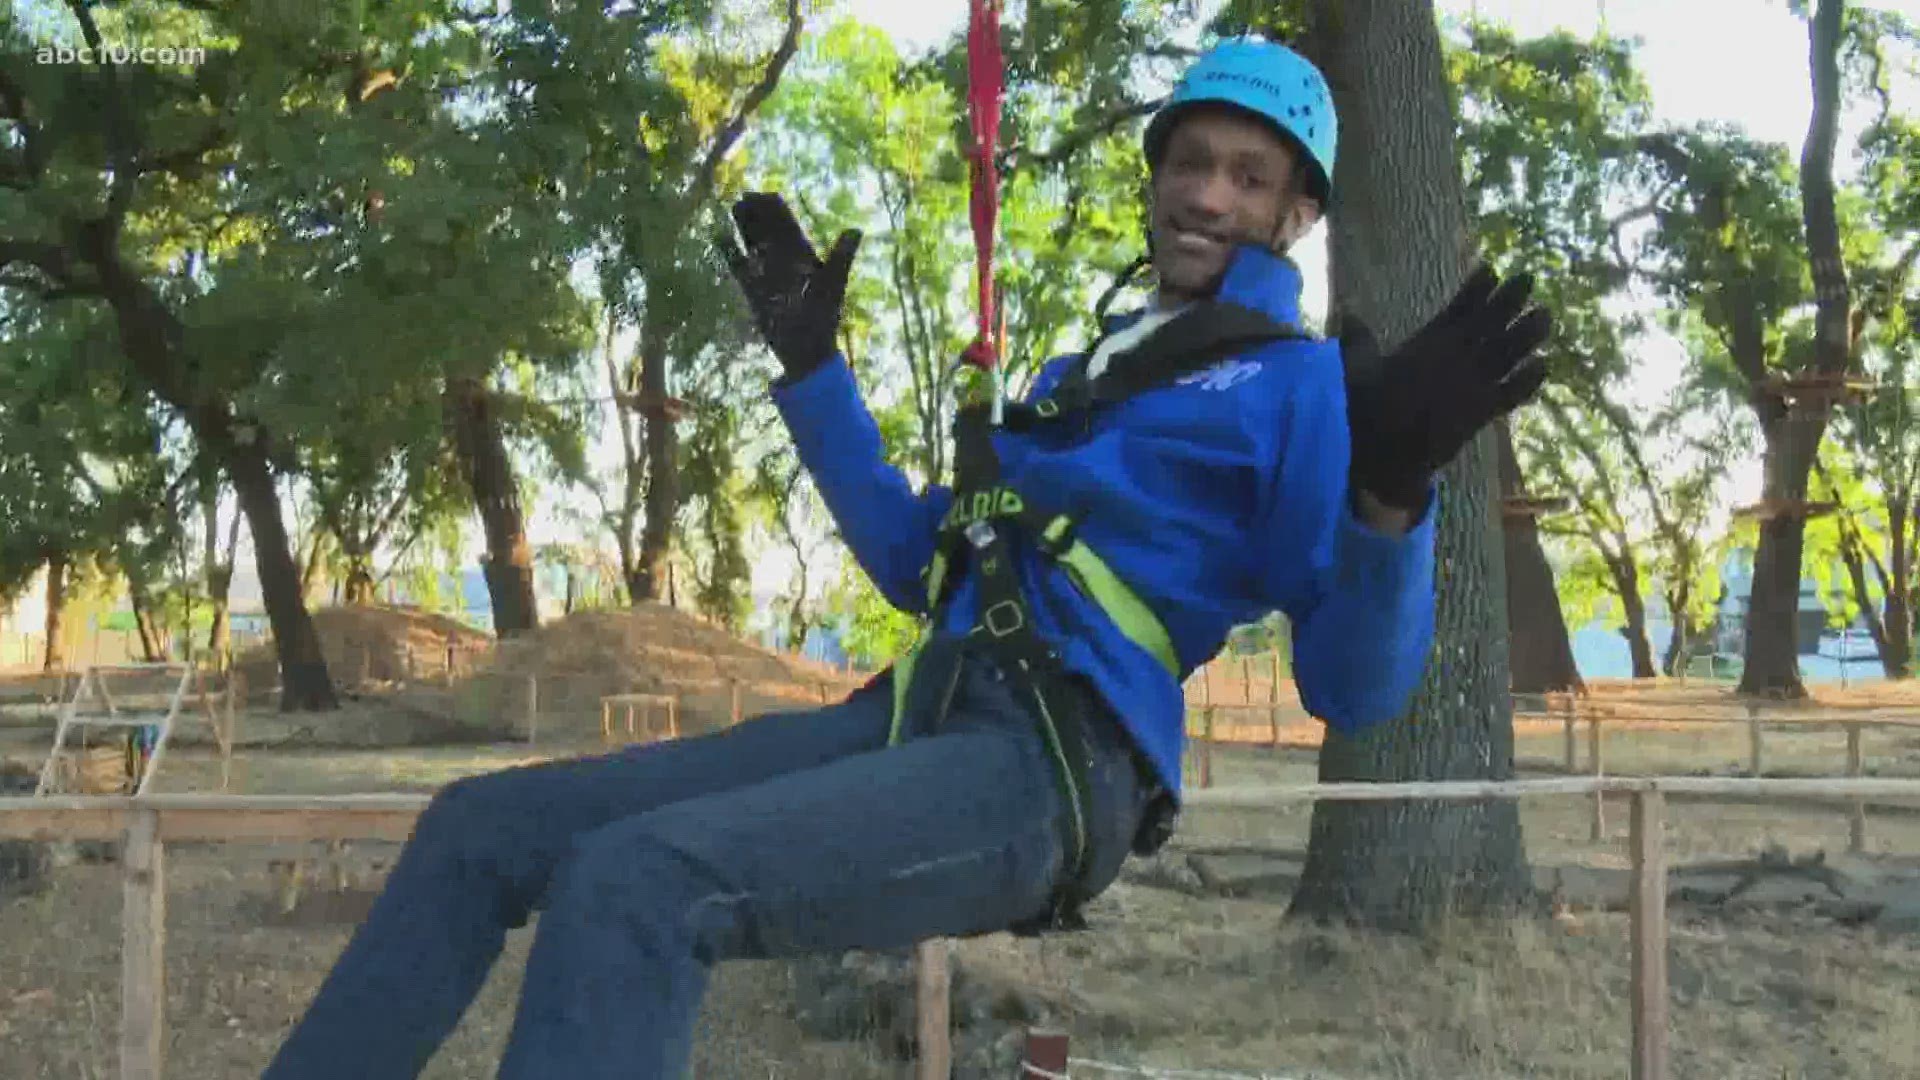 ABC10 reporter Kevin John hits the zip line at Tree Top Sac, a treetop adventure park in West Sacramento.